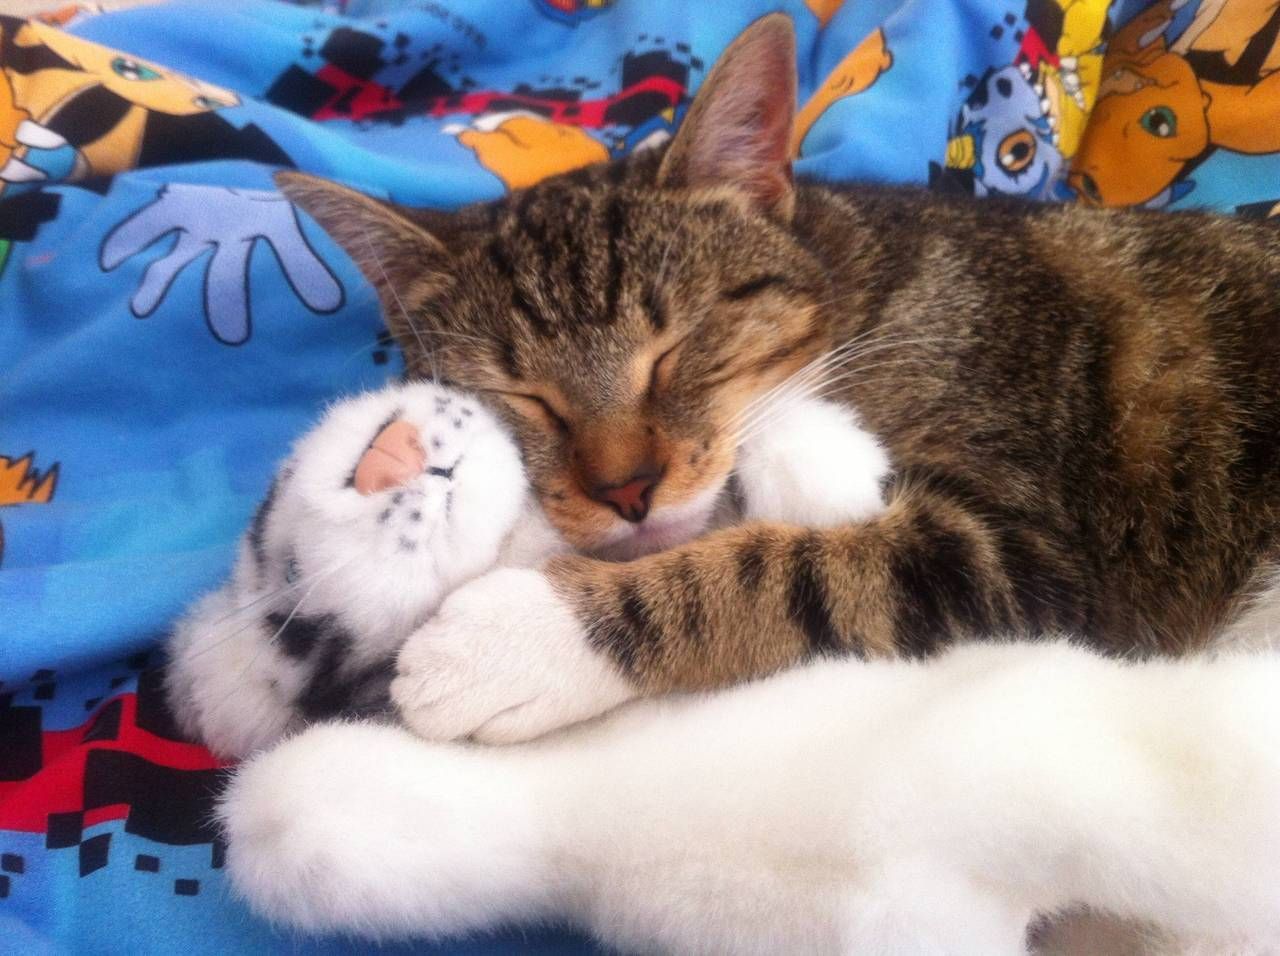 Tiger kitty with his tiger #cats #tabby